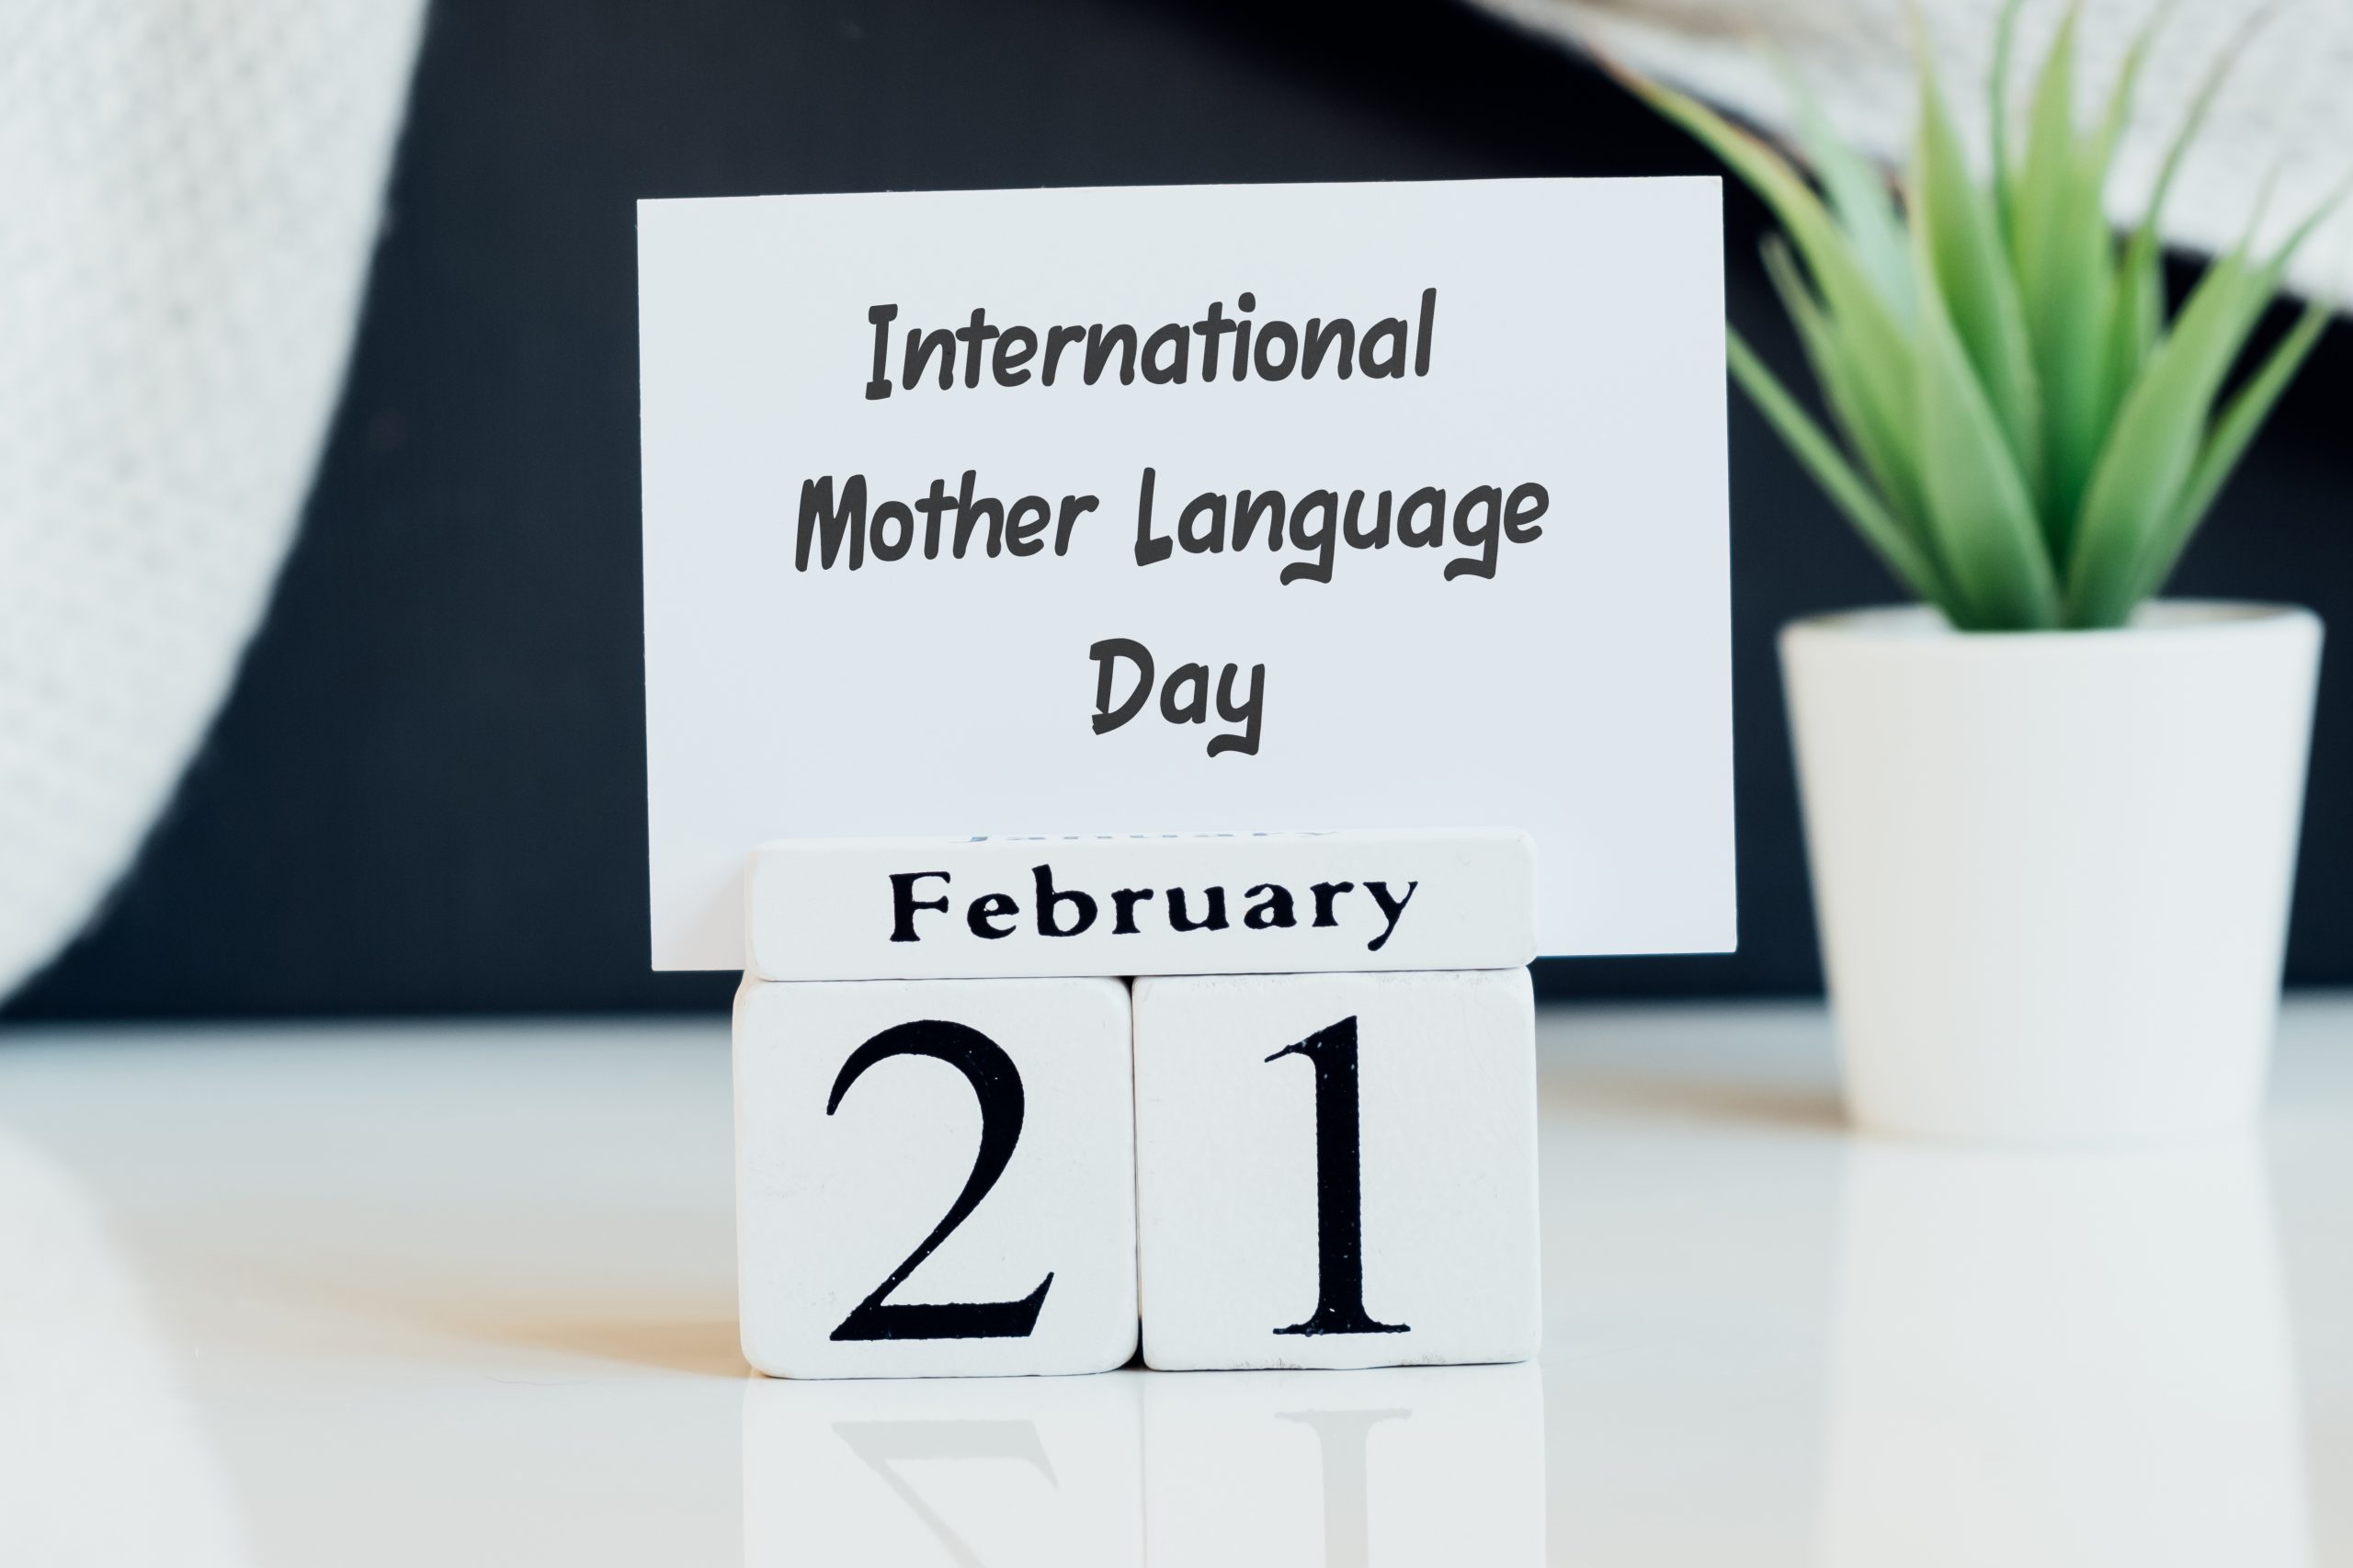 February first. February 1st. 21 February International mothers language Day Wishes.